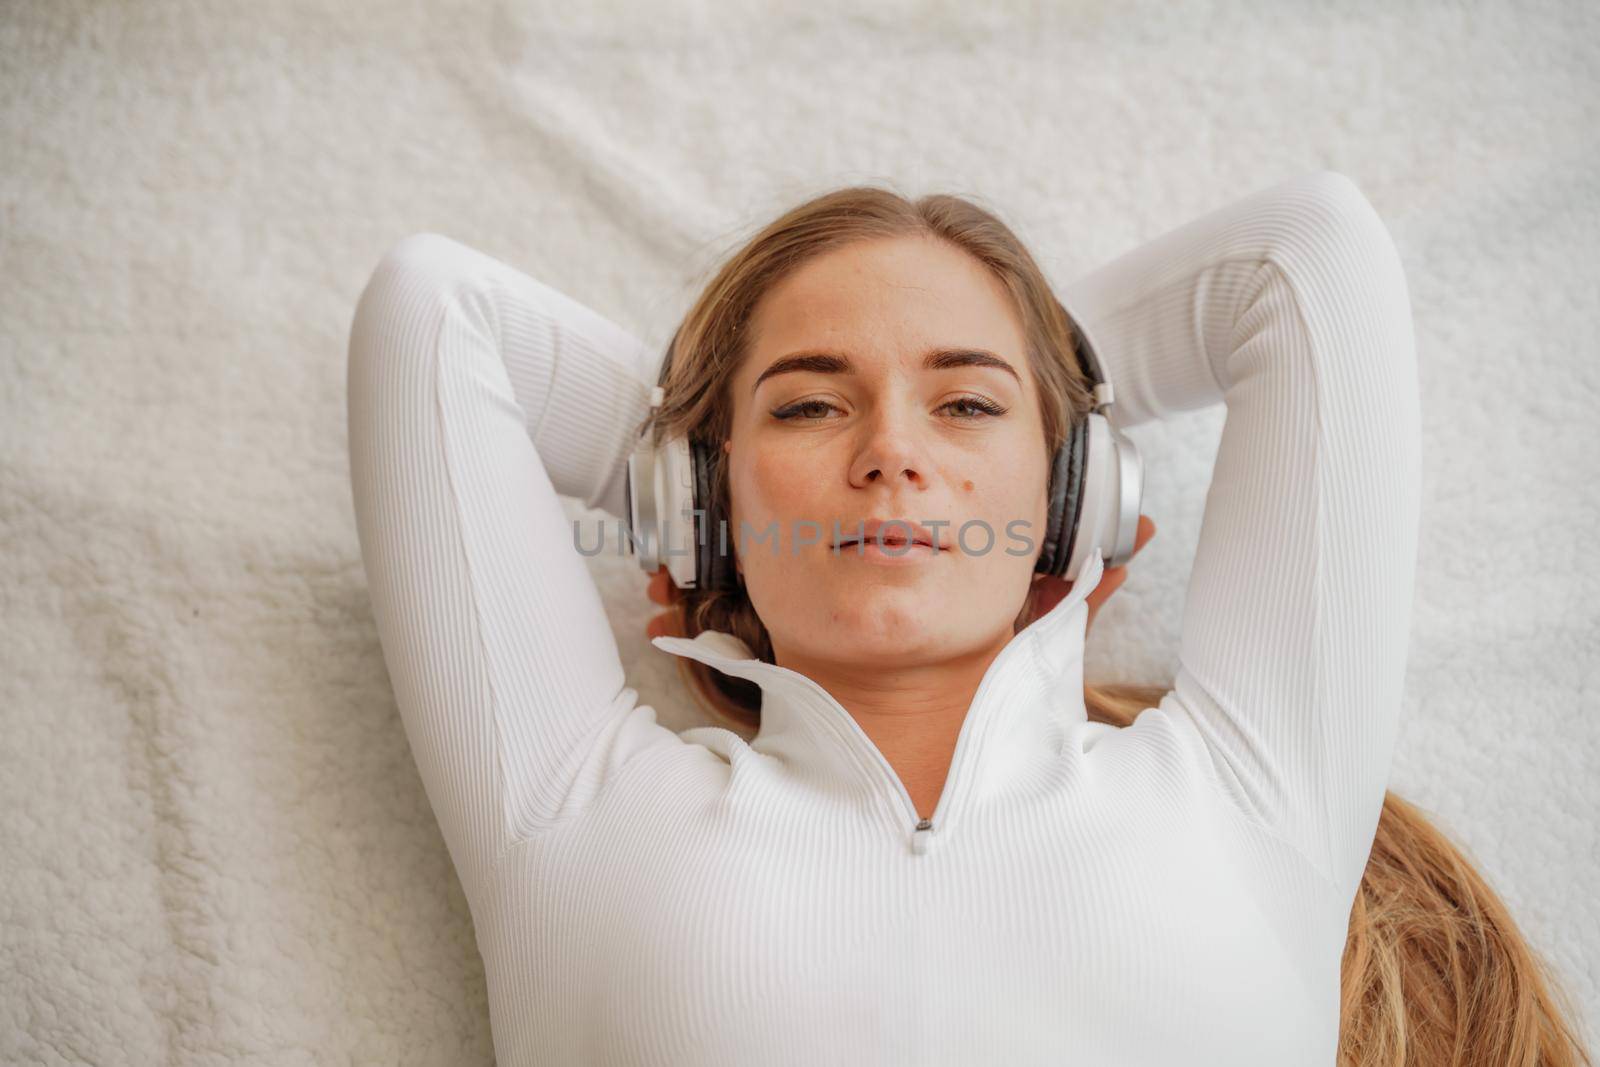 Top view portrait of relaxed woman listening to music with headphones lying on carpet at home. She is dressed in a White tracksuit